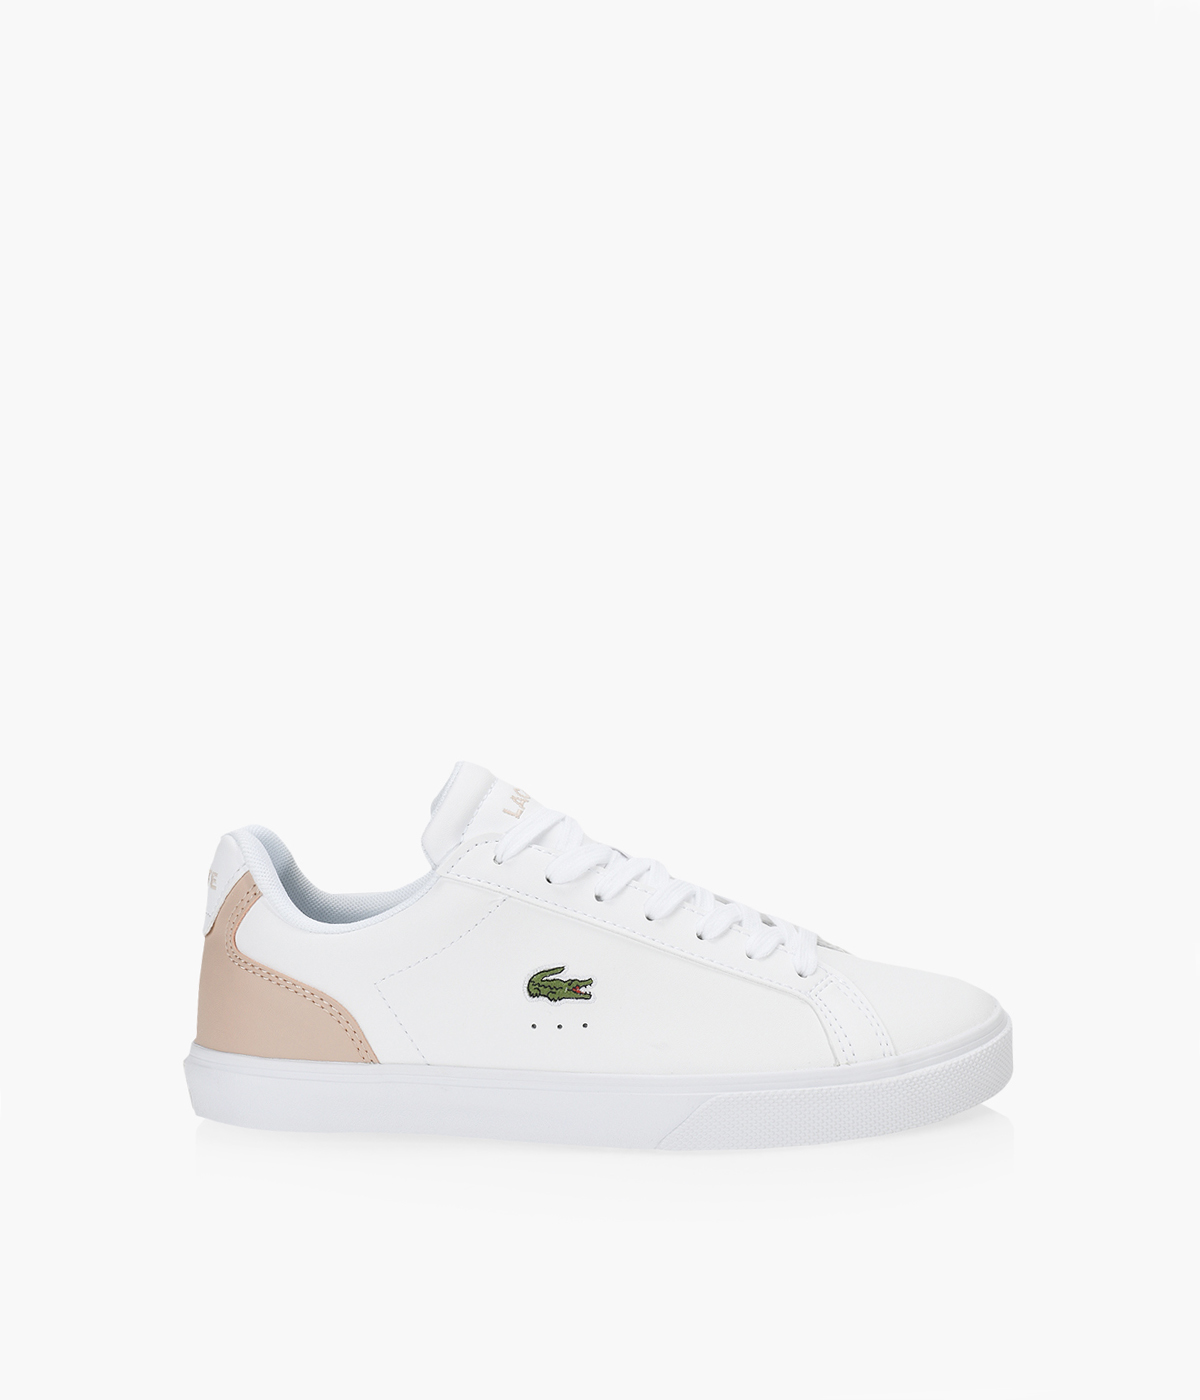 LACOSTE LEROND PRO BASELINE - Leather | Browns Shoes